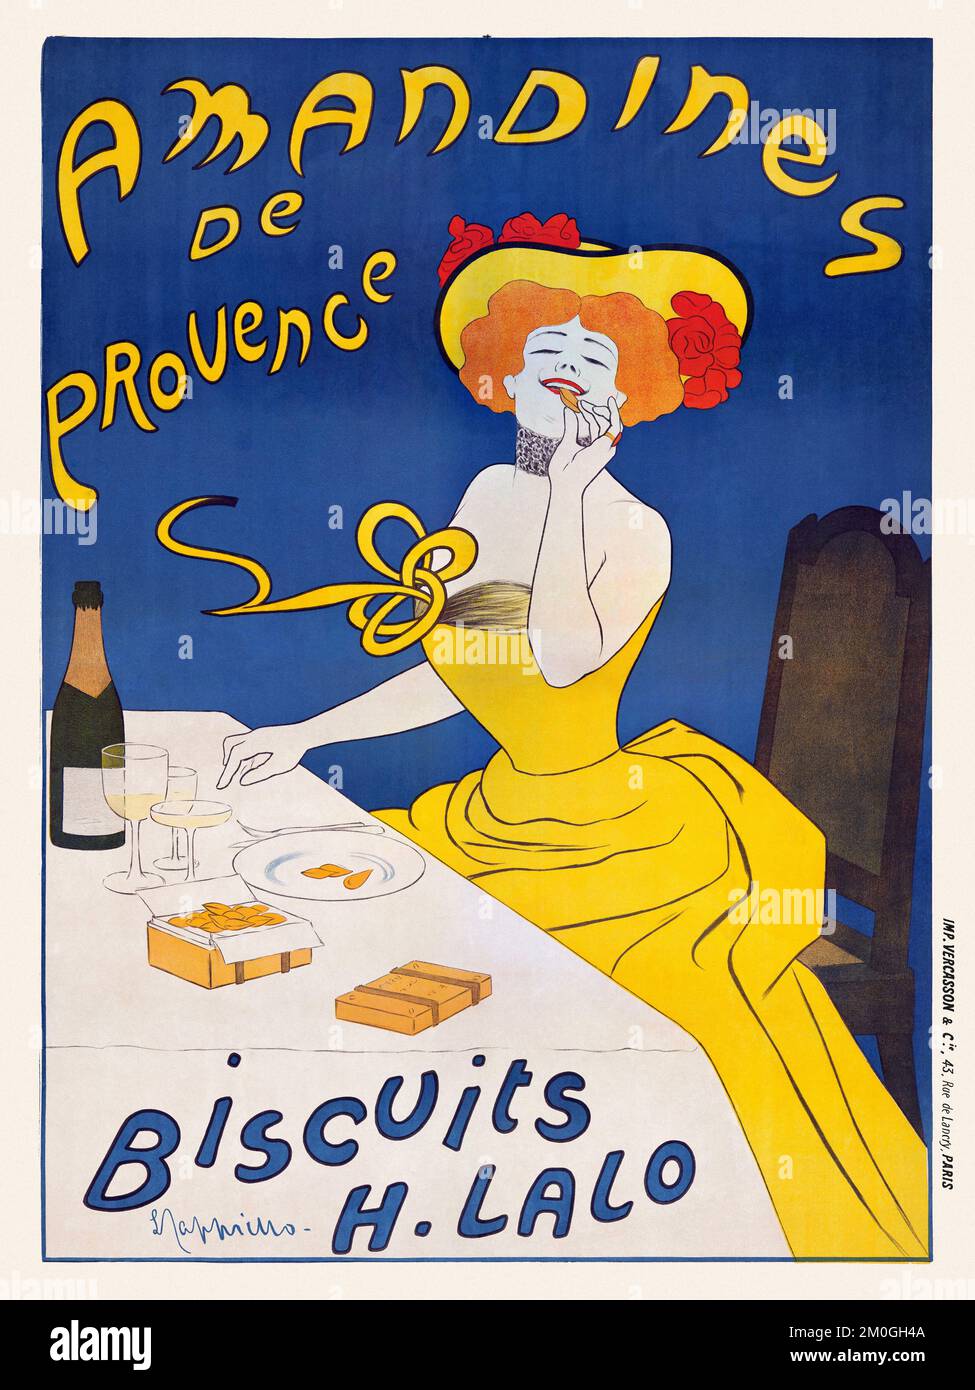 Amandines de provence. Biscuits H. Lalo by Leonetto Cappiello (1875-1942). Poster published in 1905 in France. Stock Photo